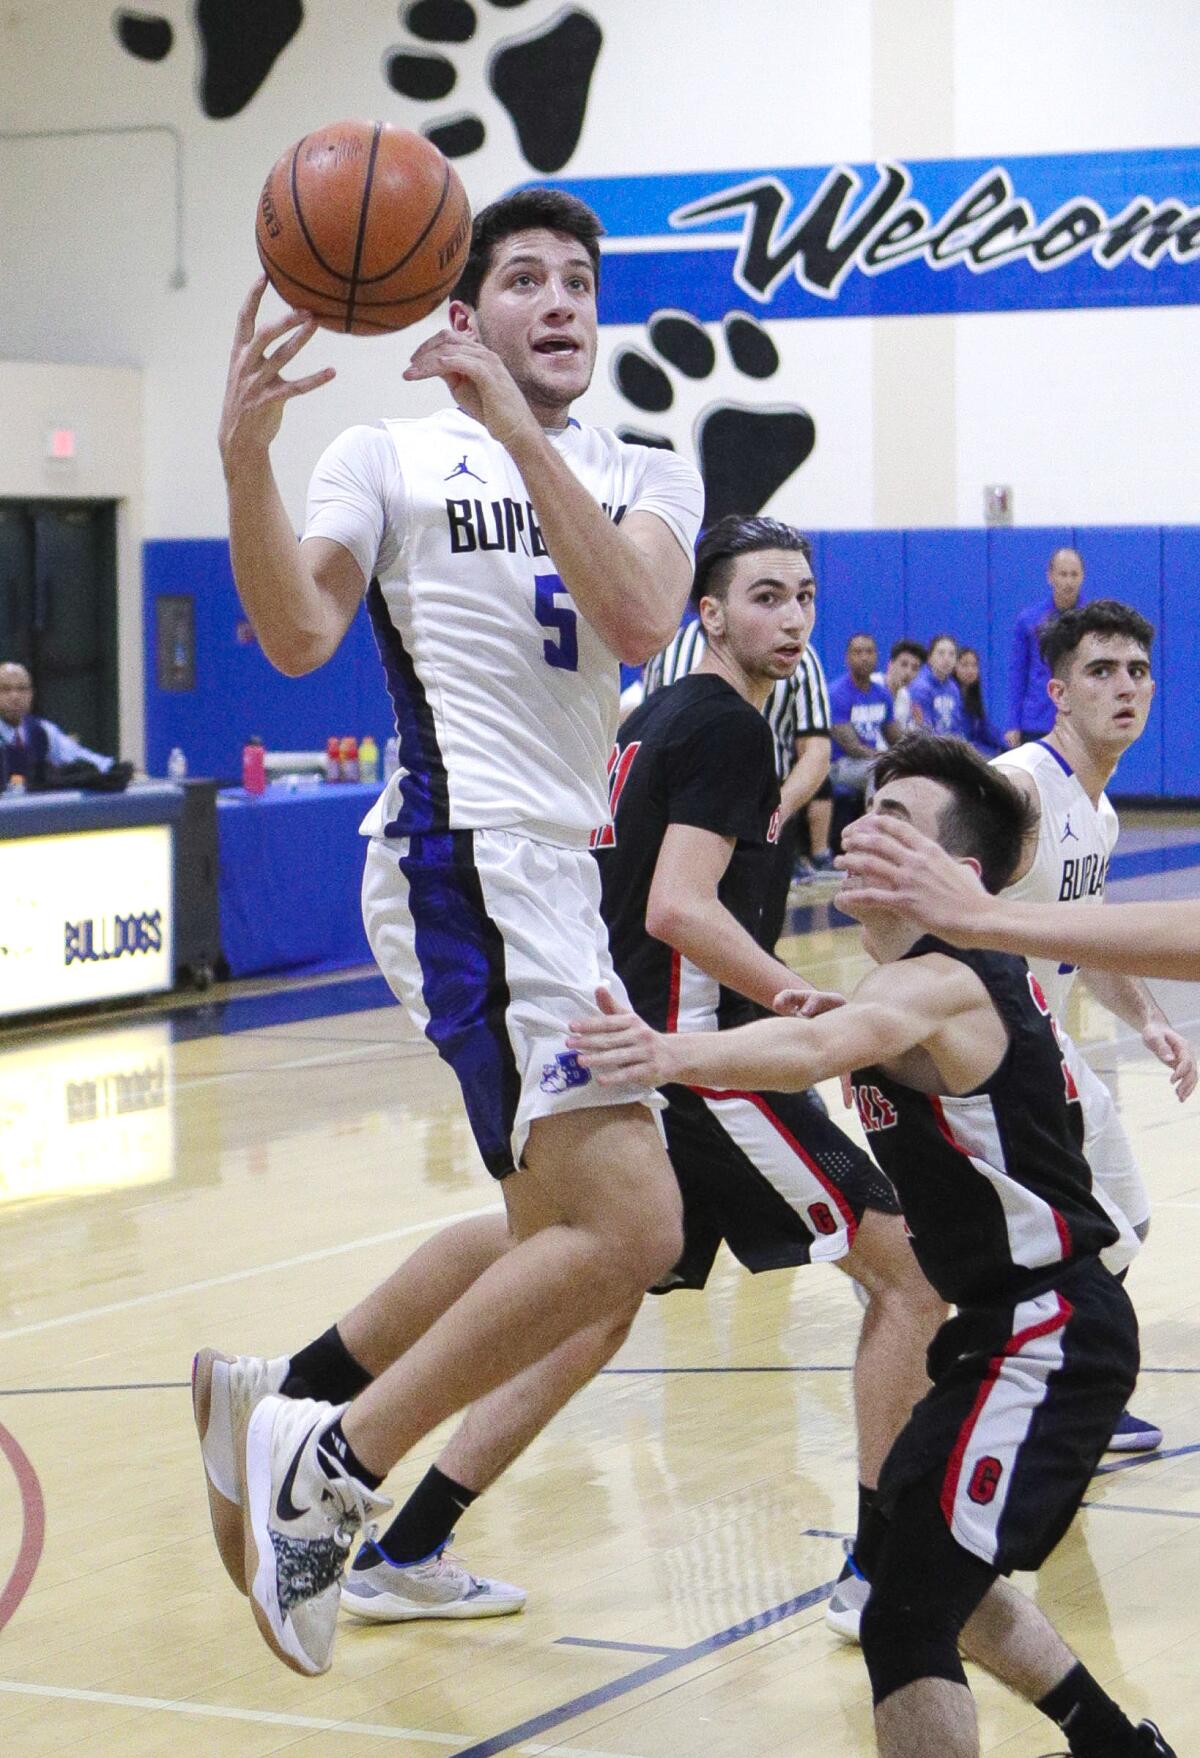 Burbank's Ben Burnham drives and hangs in the air to shoot as the ball gets out of his control in the paint against Glendale in a Pacific League boys' basketball game at Burbank High School on Friday, January 17, 2020.